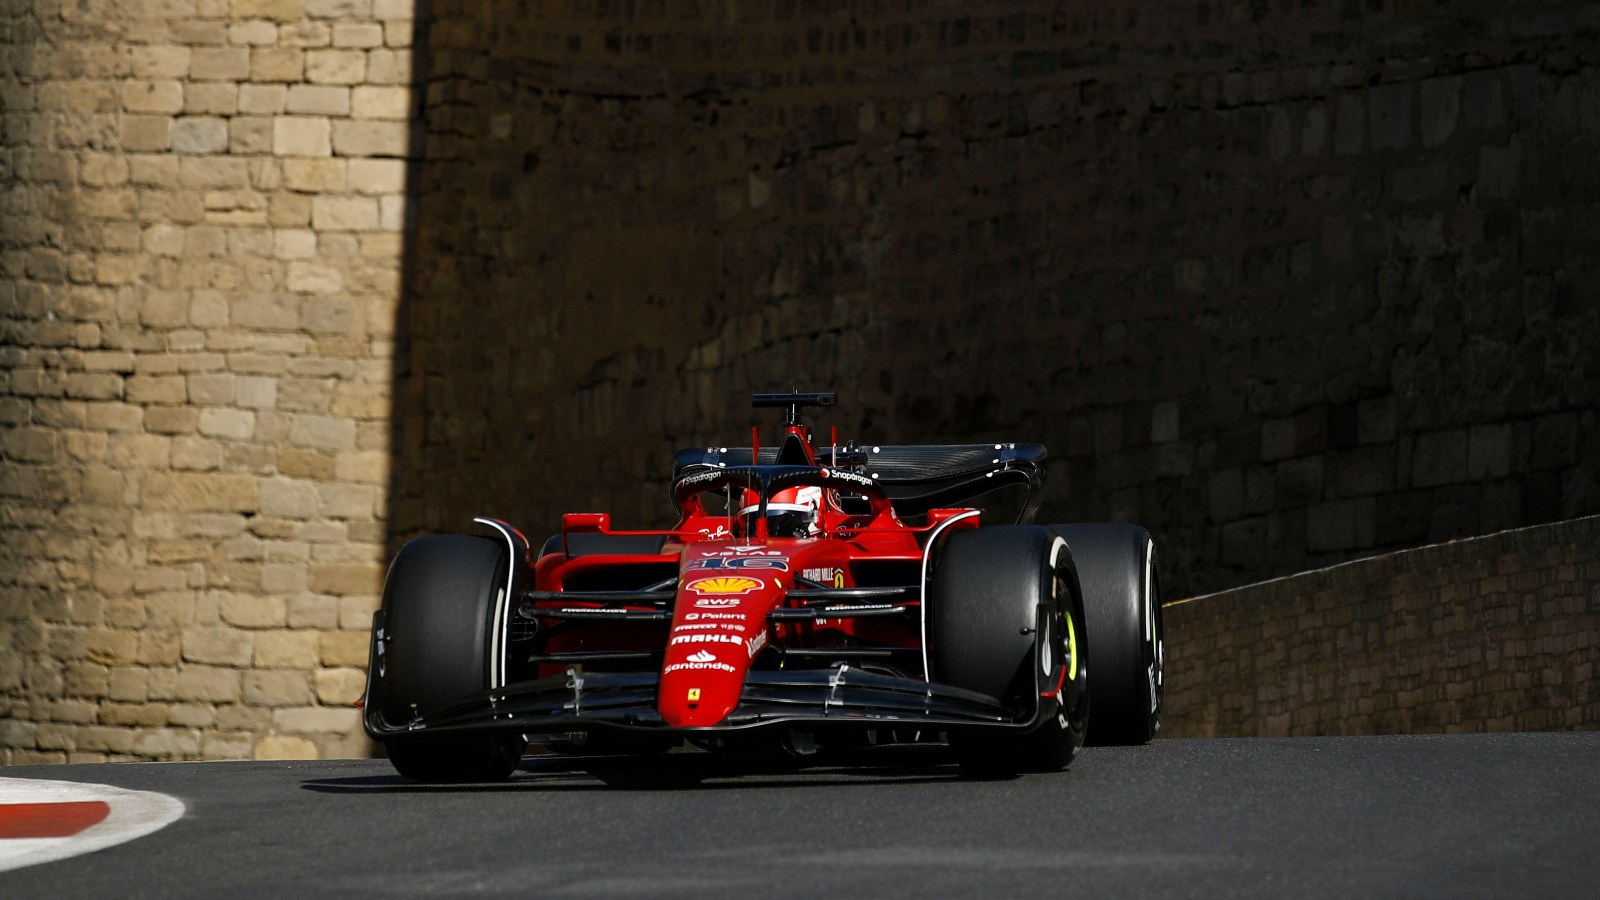 F1 Azerbaijan GP LIVE: Ferrari's Charles Leclerc leads, Verstappen and Sainz take the second and third spots - Follow Qualifying Live Updates